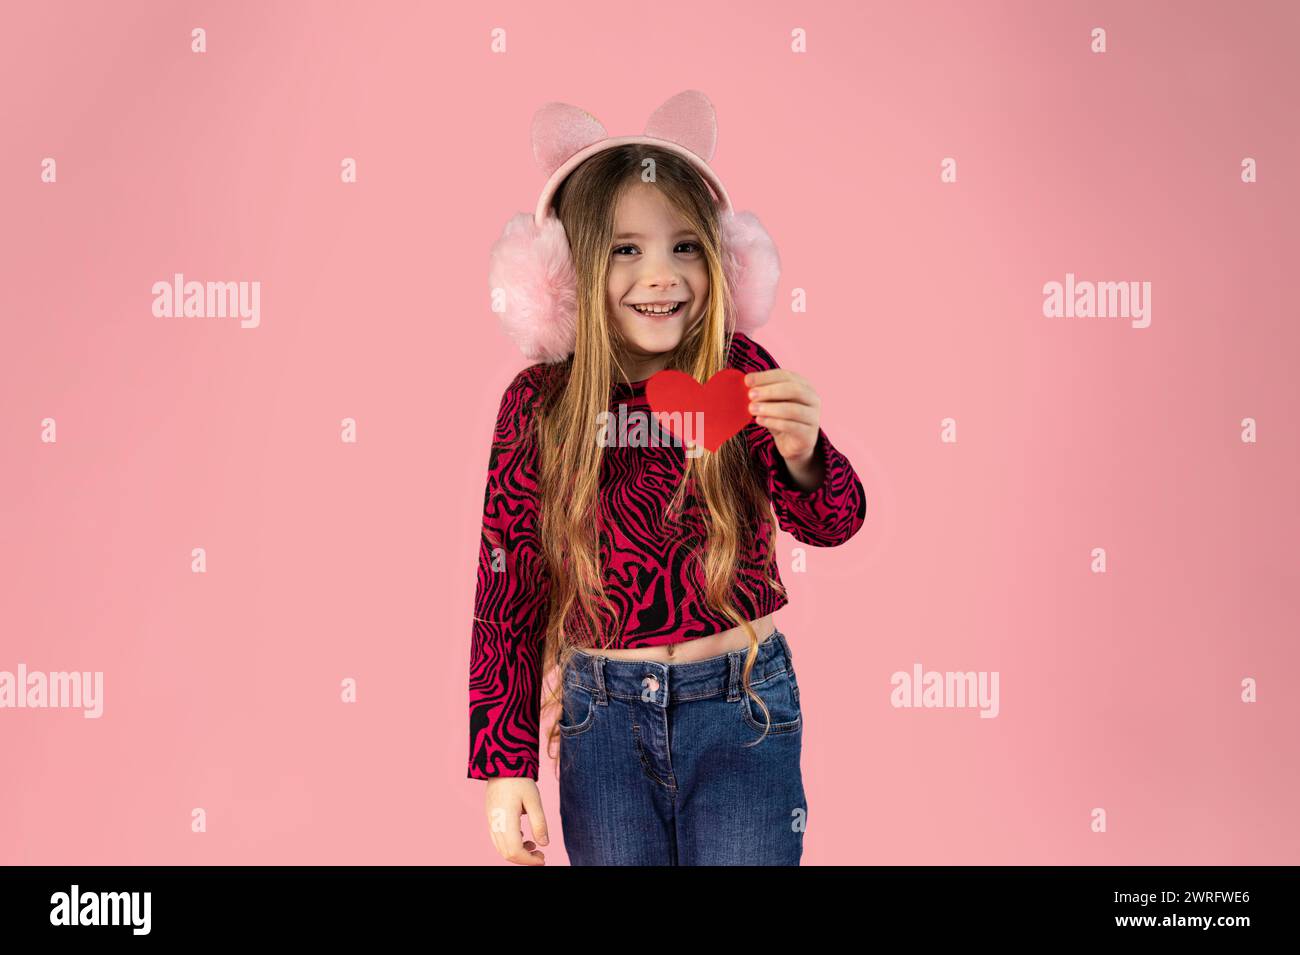 Little girl with long blond hair wearing pink headphones on her ears, dressed in jeans and a pink printed sweater holds a small paper heart and smiles Stock Photo